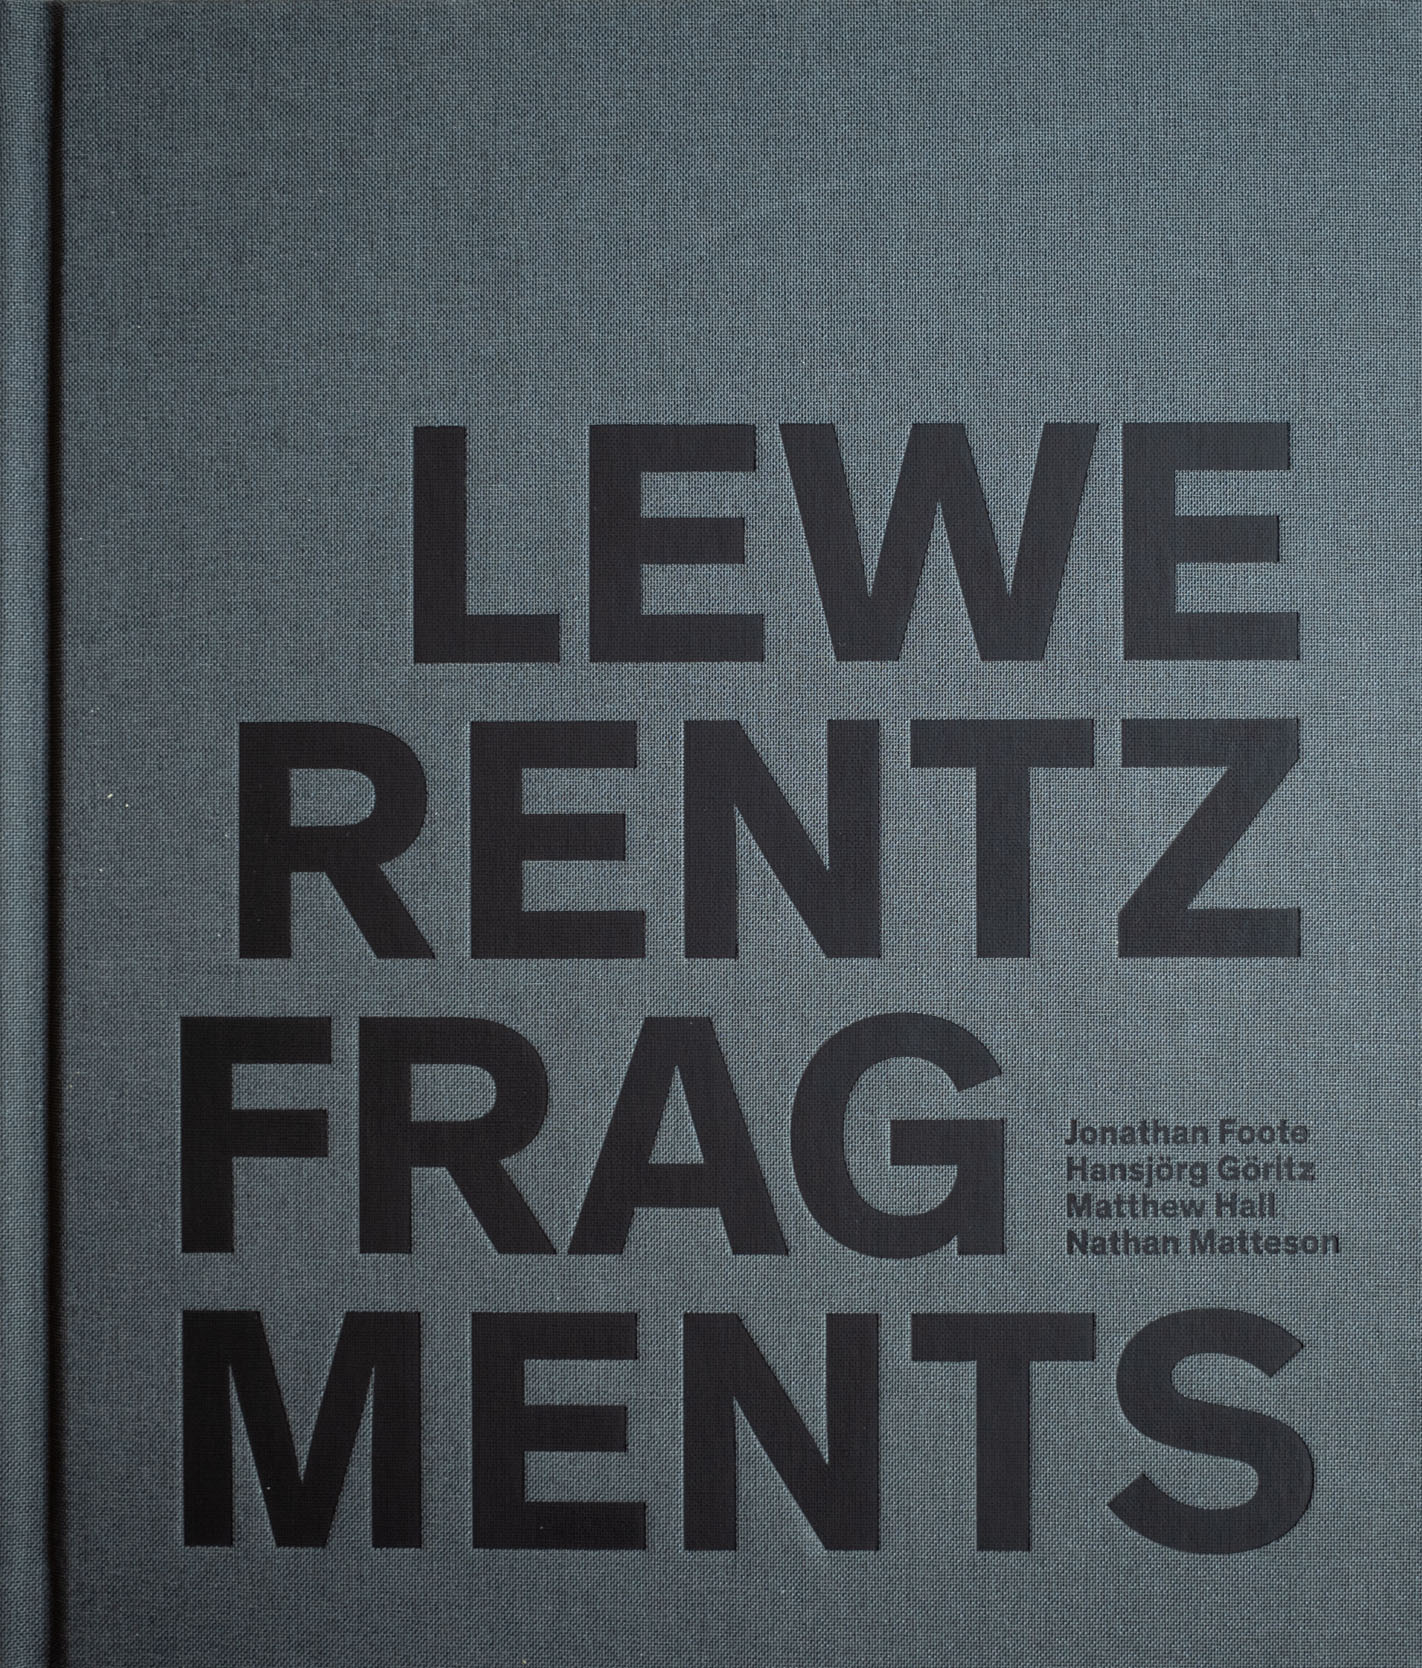 Through new essays, recently discovered archival material, photography, and drawings, the publication Lewerentz Fragments explores the architect’s body of work spanning three-quarters of the twentieth century.